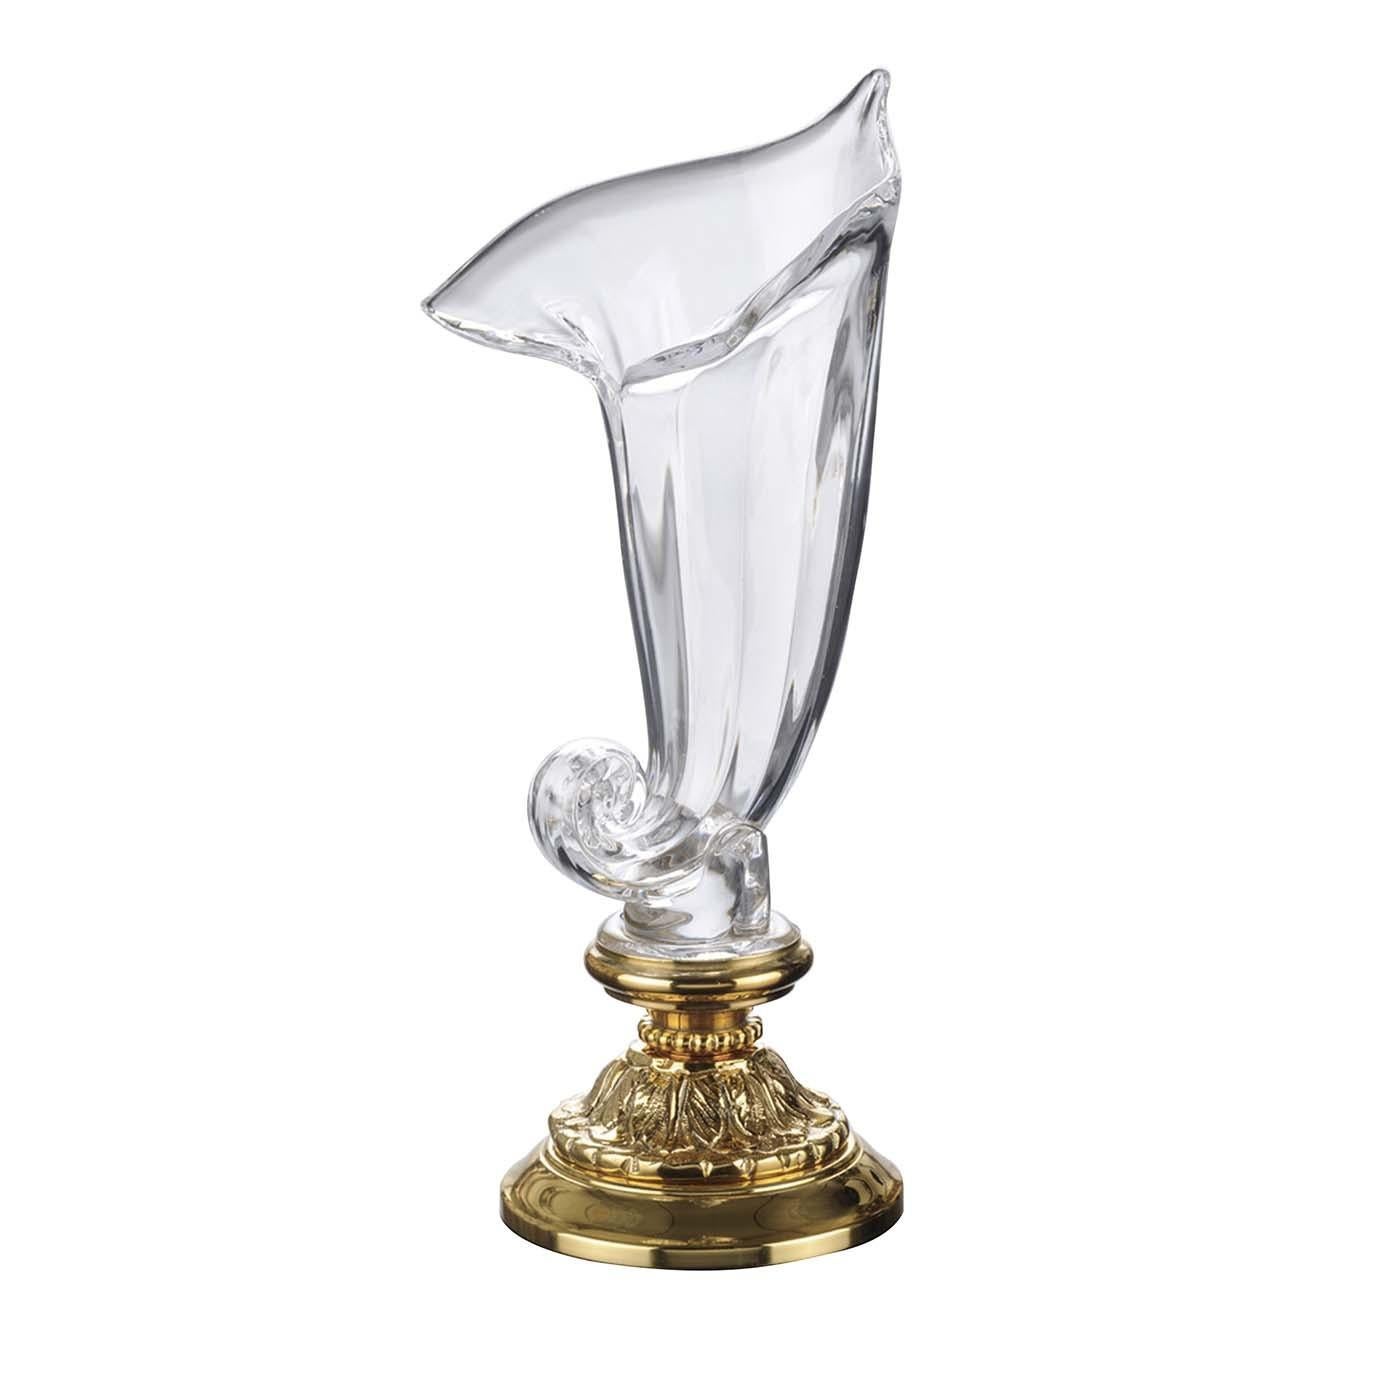 This magnificent piece of functional decor is a crystal vase shaped as a calla lily flower. The classically inspired design makes this object a superb addition to a traditional decor. The 24% PbO polished crystal curves at the bottom, to open up in